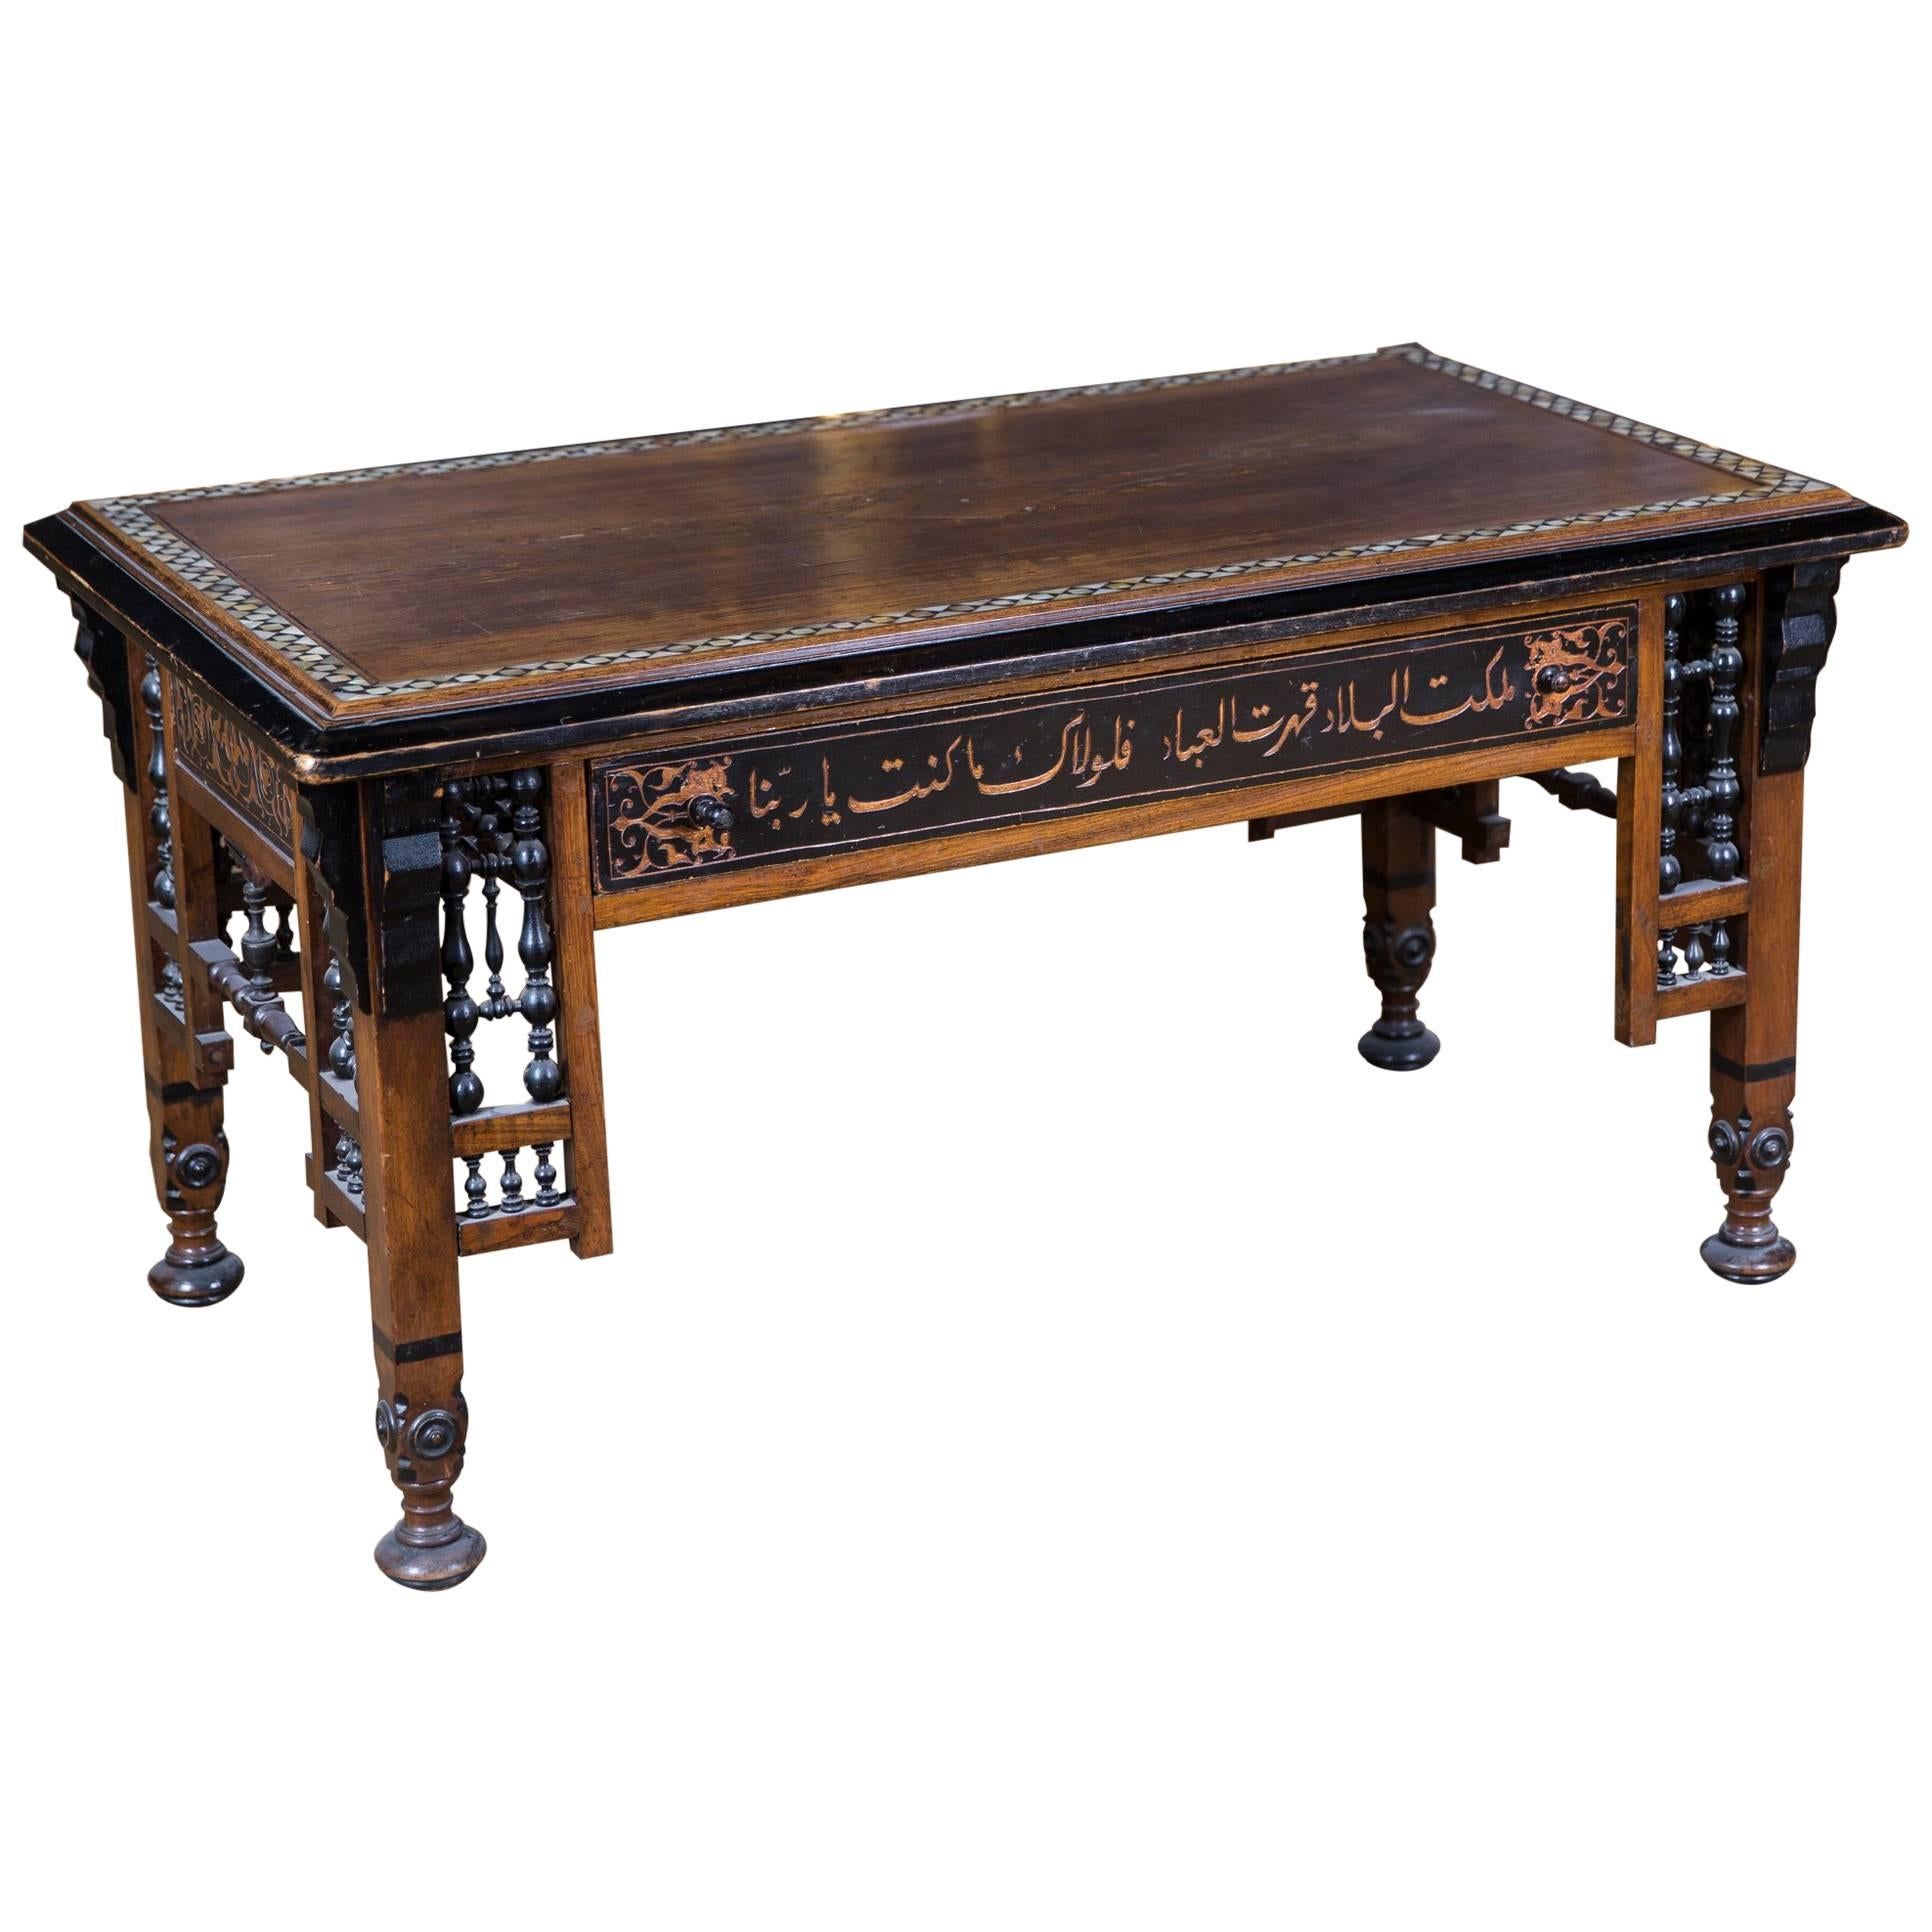 19th Century, Oriental Couch Table with Inlaid Marakesch, circa 1900